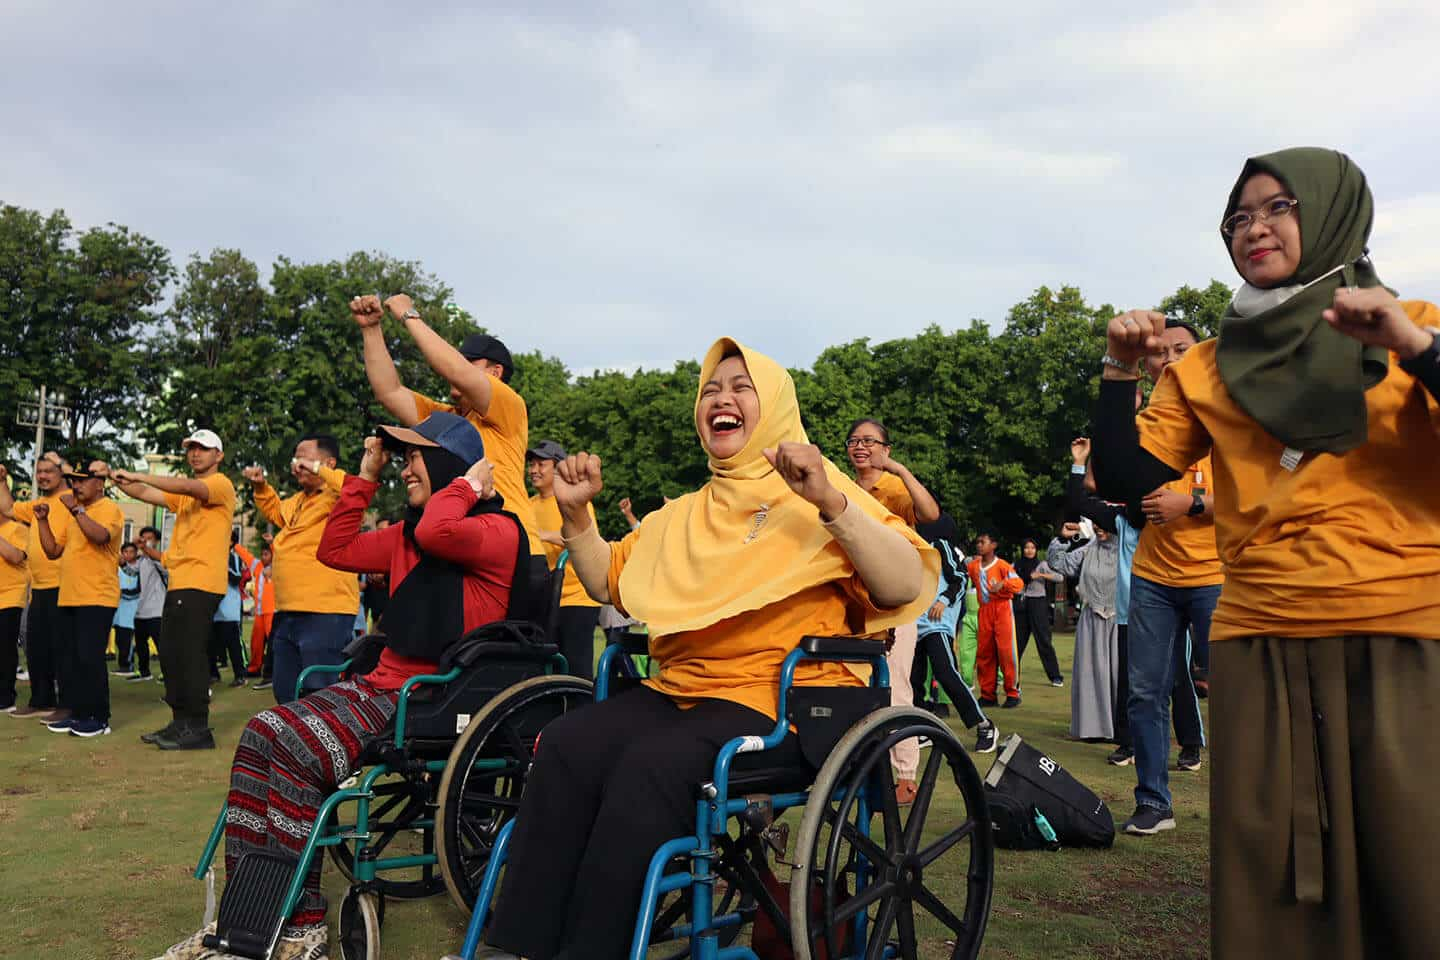 INKLUSI advances the work of government, civil society and social movements in Indonesia as they seek to further gender equality, the rights of persons with disabilities and social inclusion.